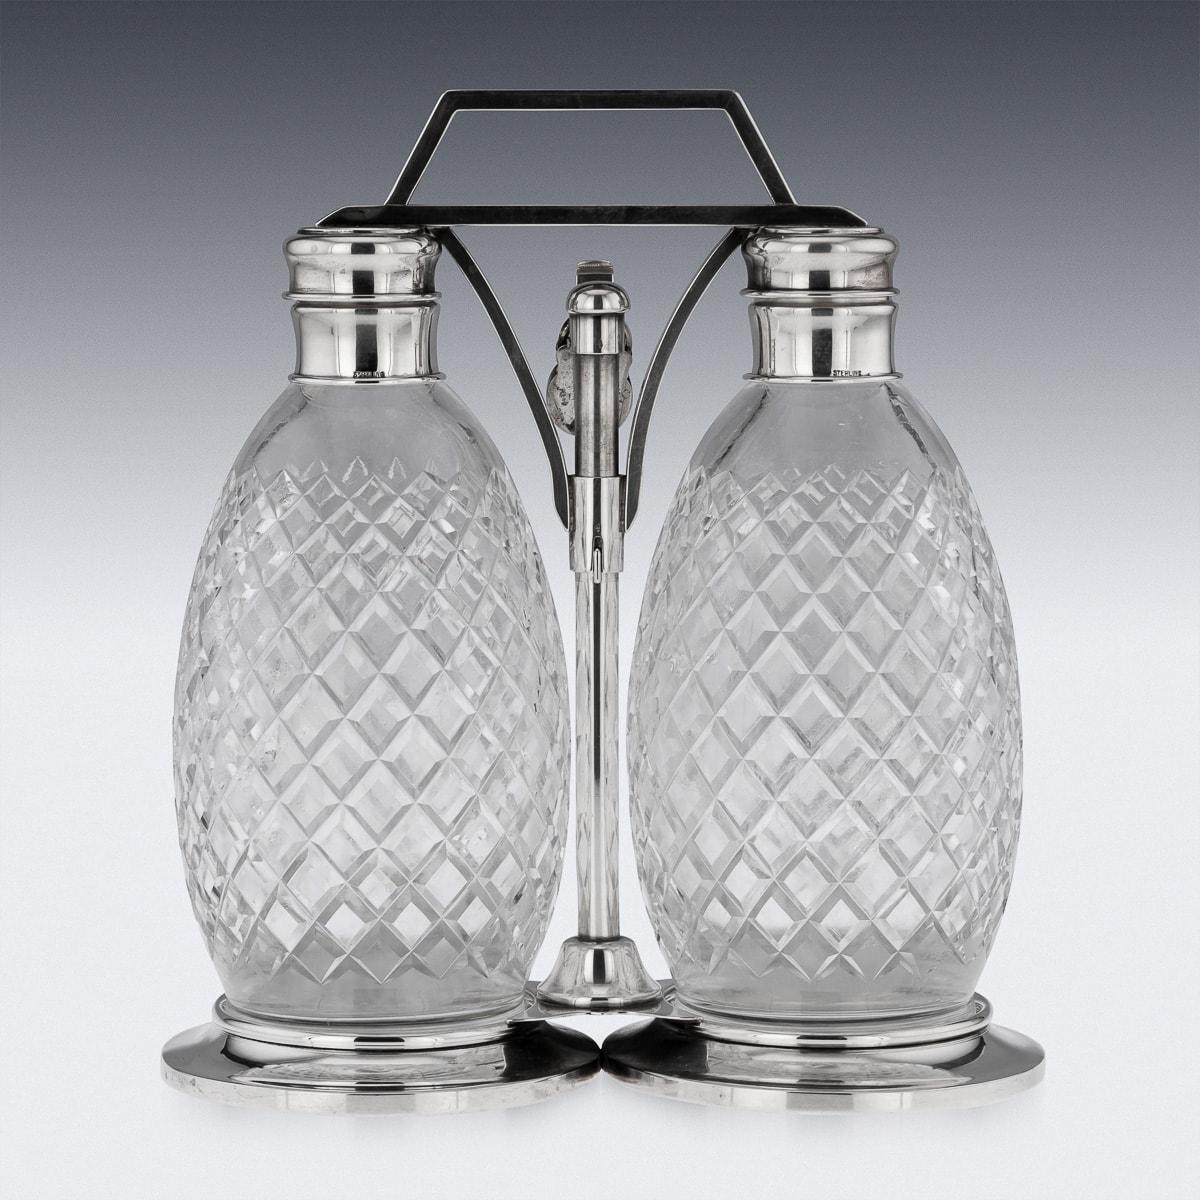 20th Century American Solid Silver & Cut Glass Tantalus, Tiffany & Co, c.1920 For Sale 1